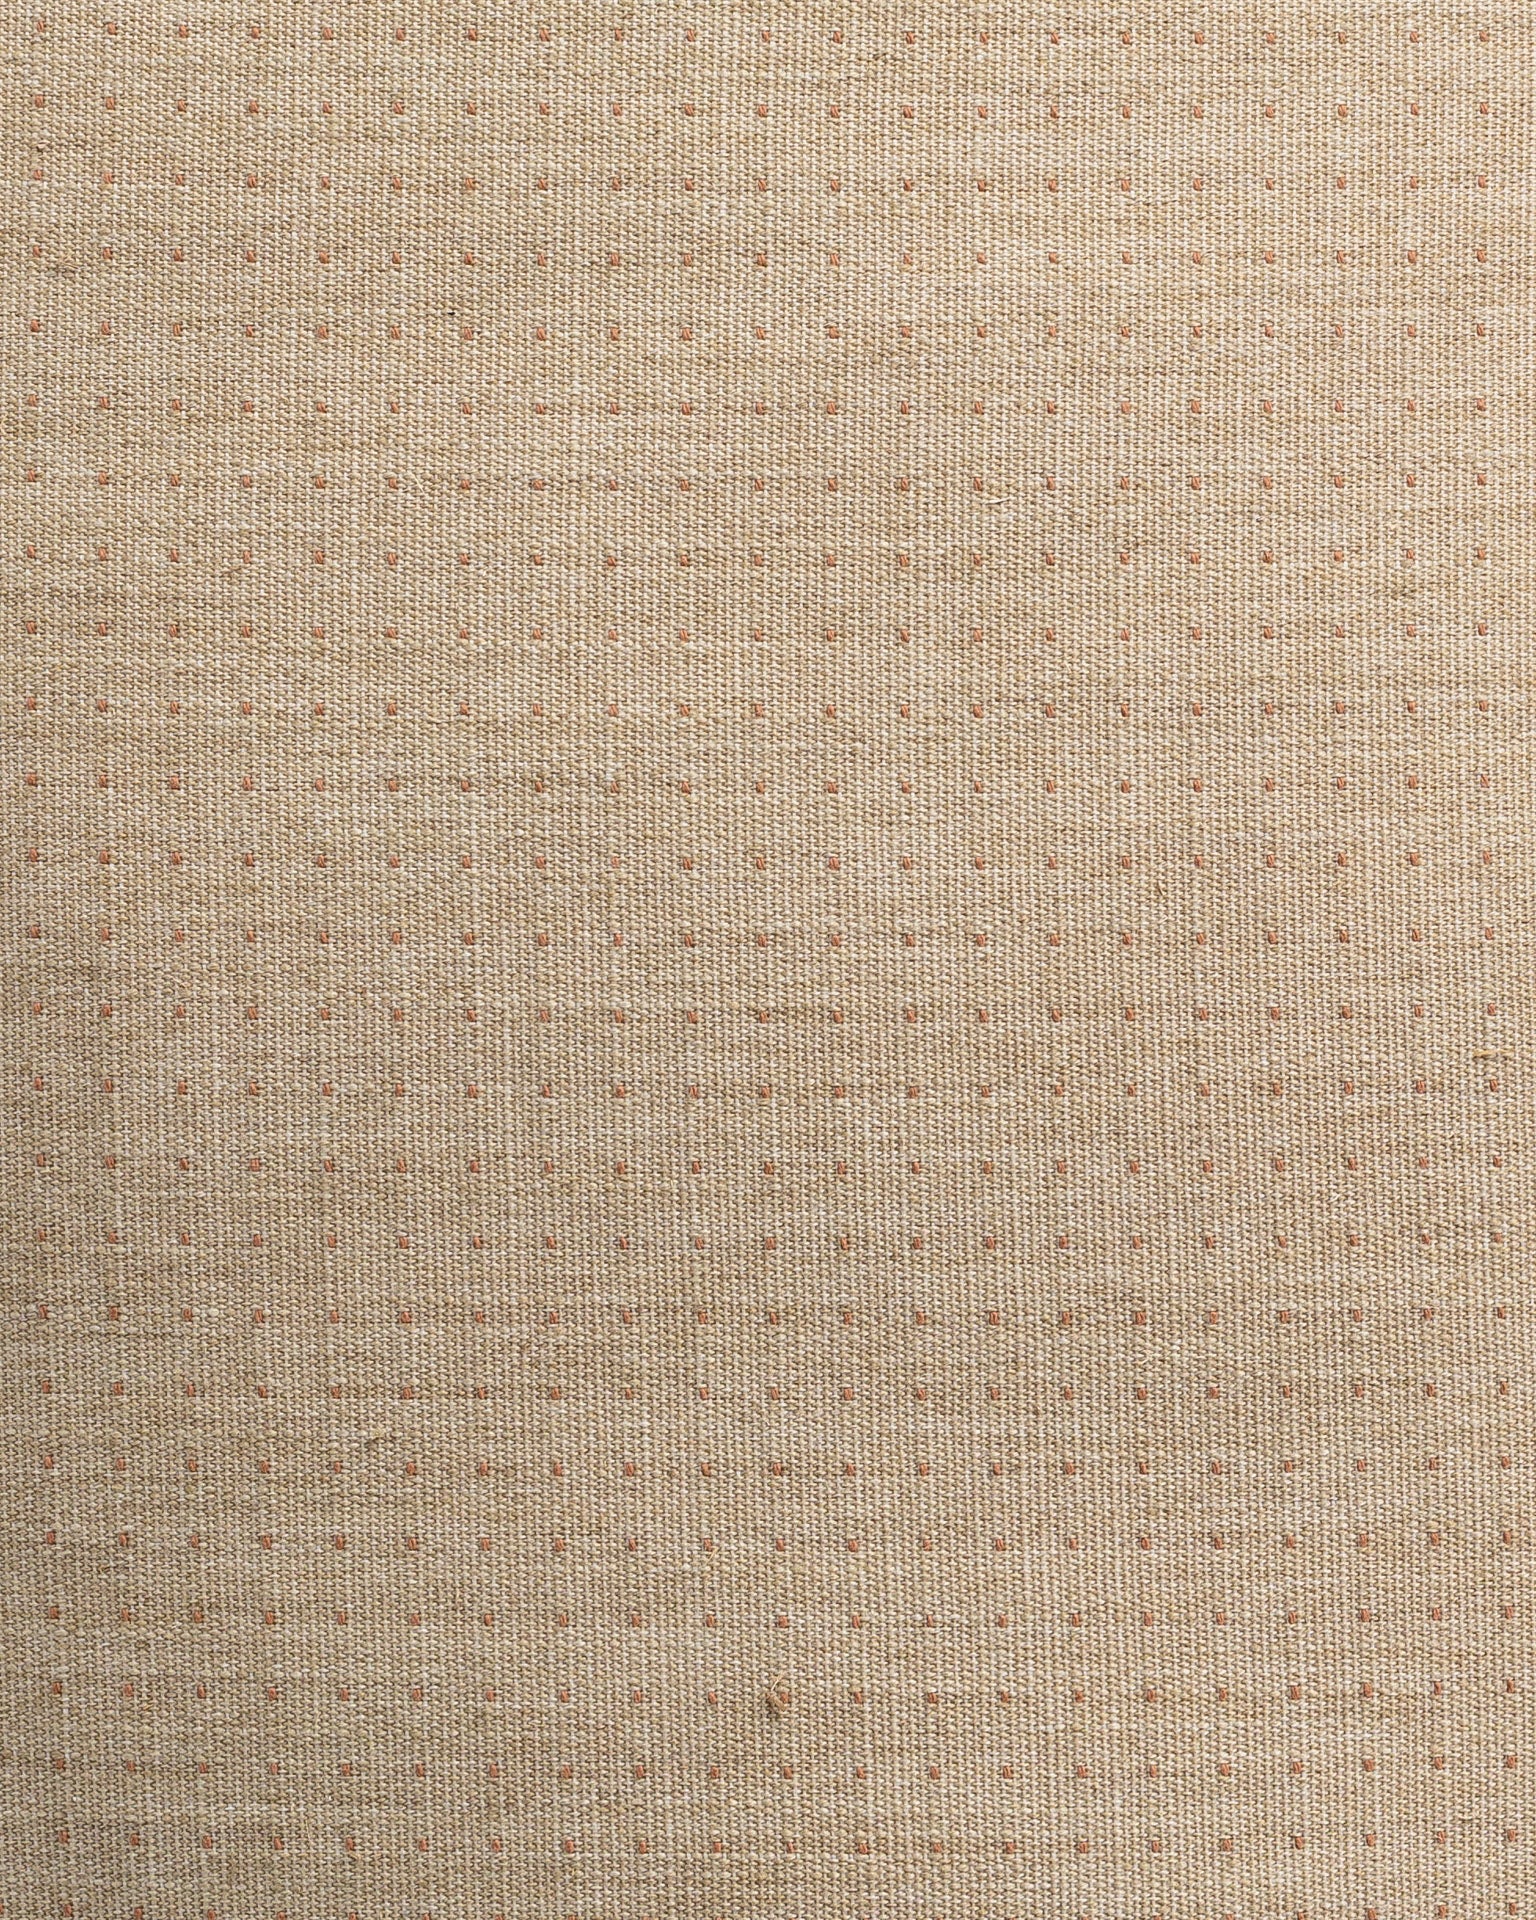 Close-up texture of a beige fabric with a subtle, uniform pattern of tiny, scattered red dots, reminiscent of the rustic interiors found in Scottsdale Arizona bungalows can be seen on the Gabby Happy Dot Blush Pillow 26x26.